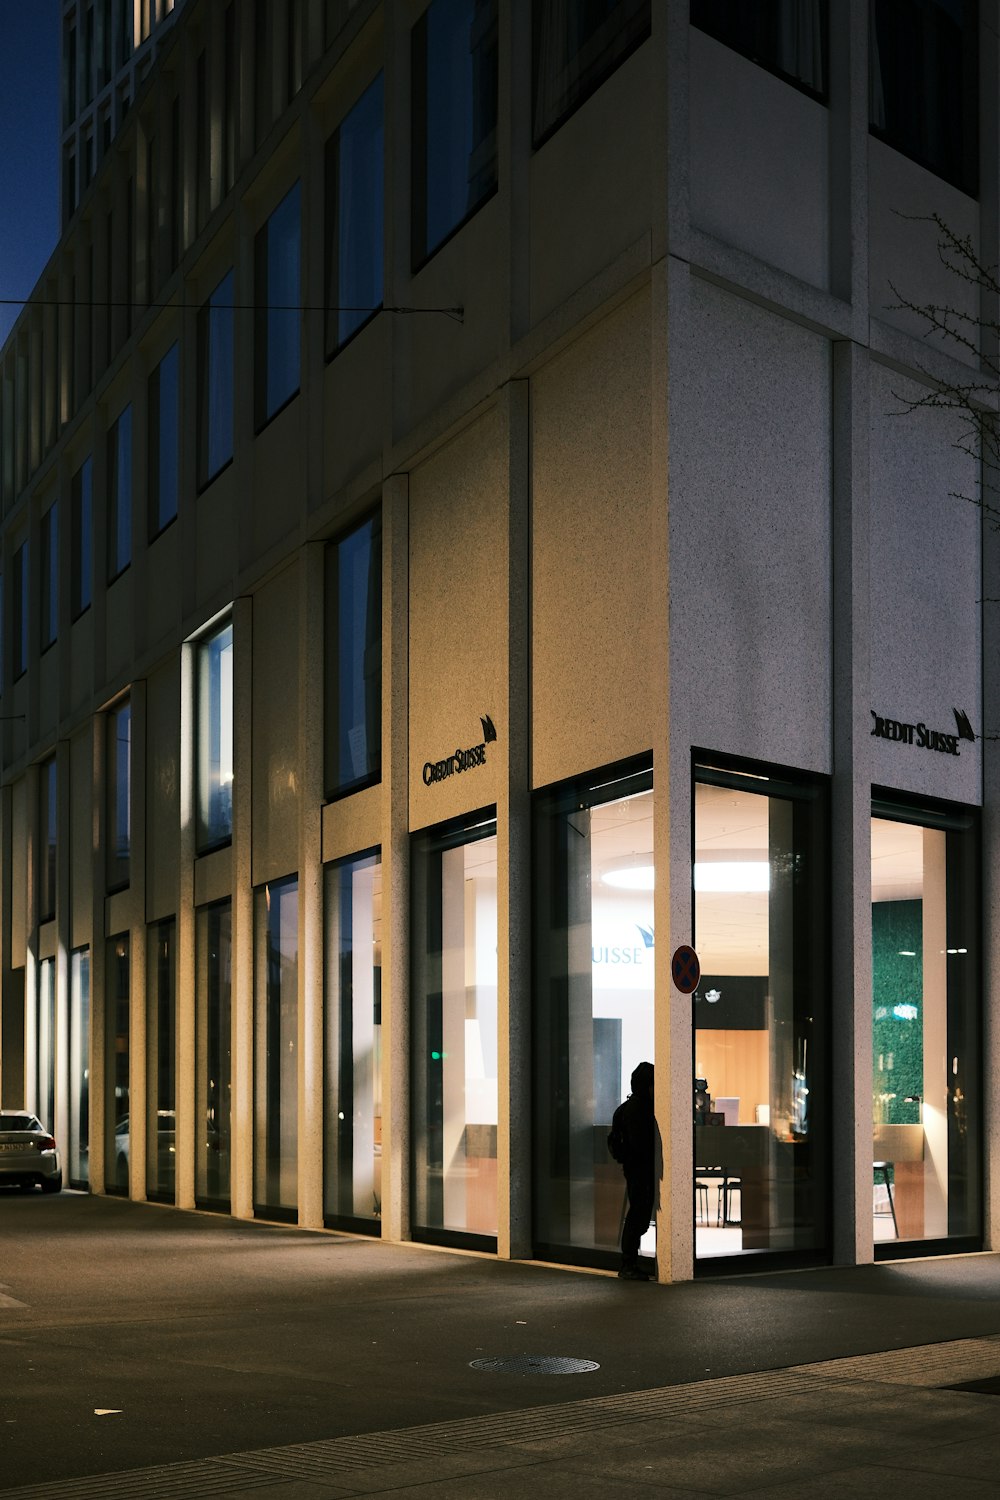 a person walking out of a building at night